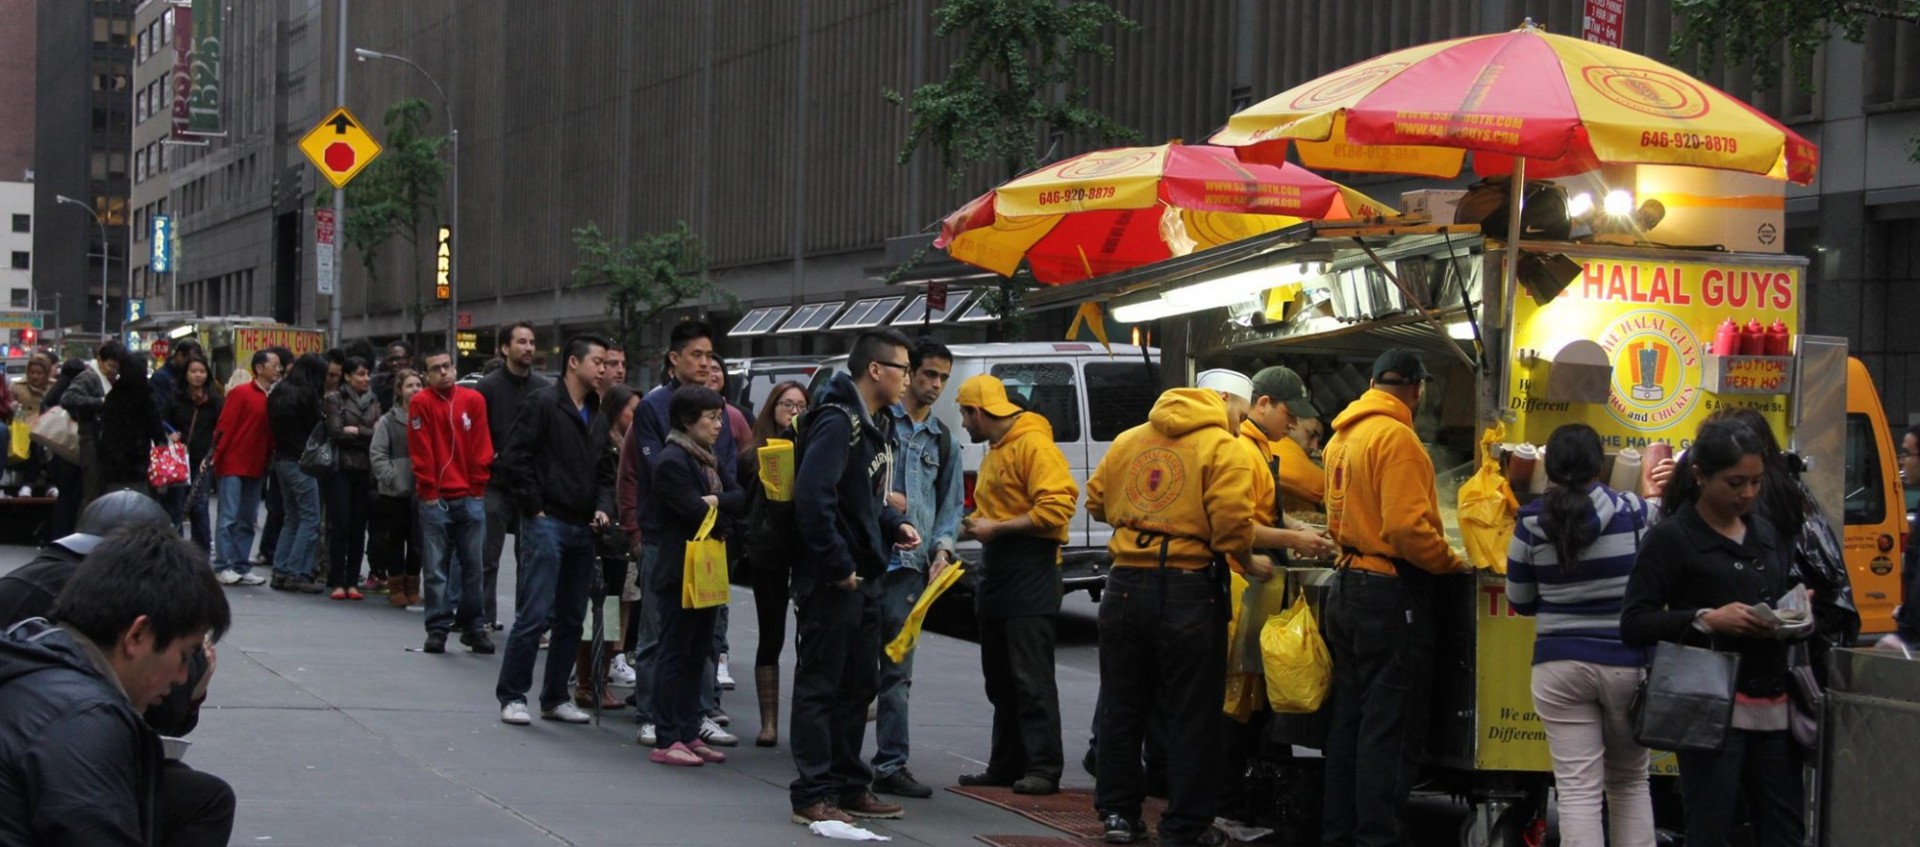 Image of people waiting in line to order from The Halal Guys food truck.